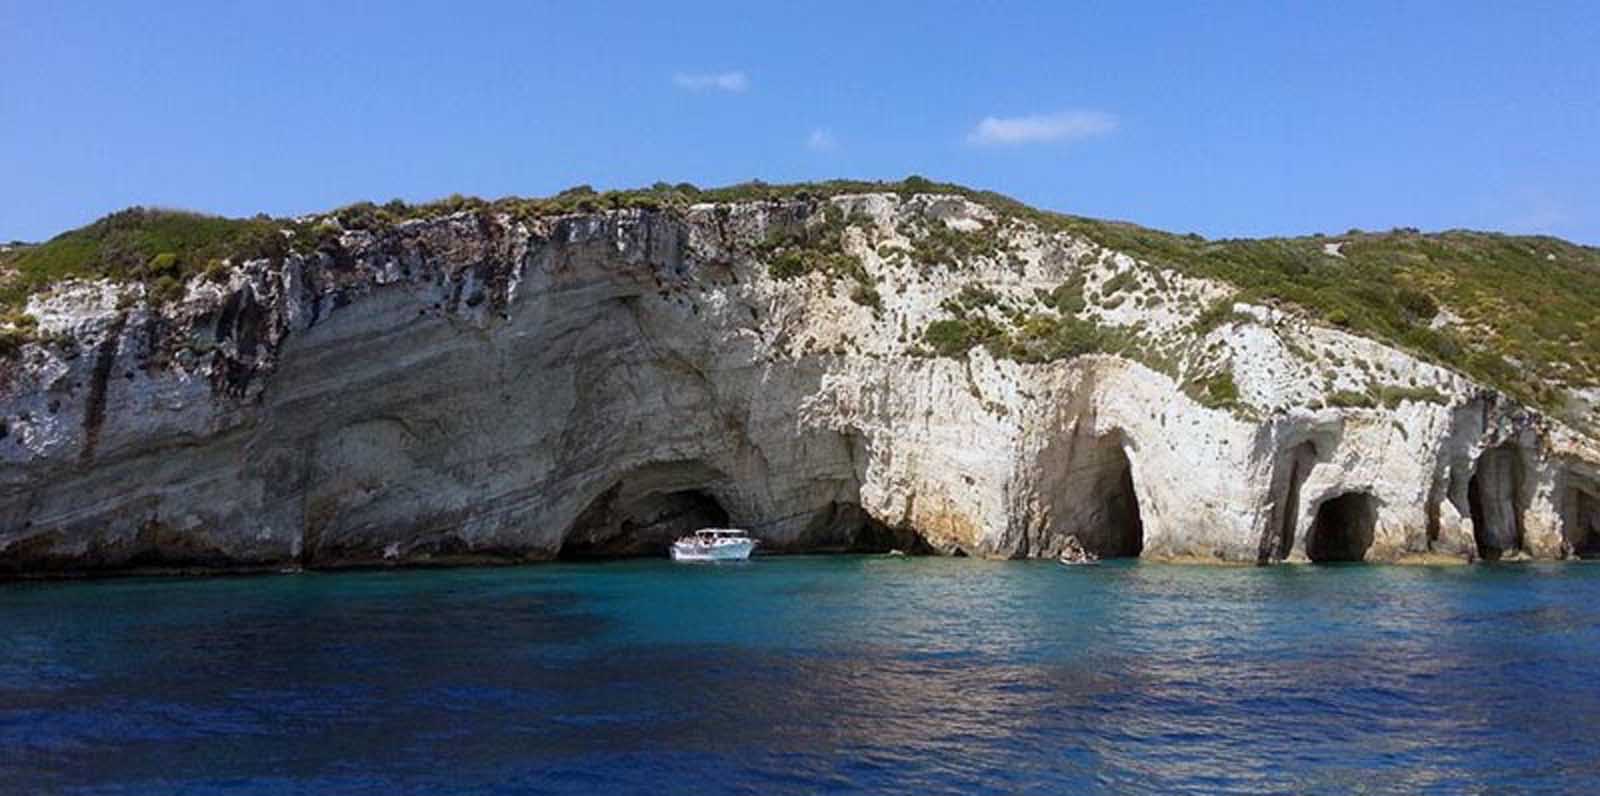 best things to do in zakynthos greece - blue caves